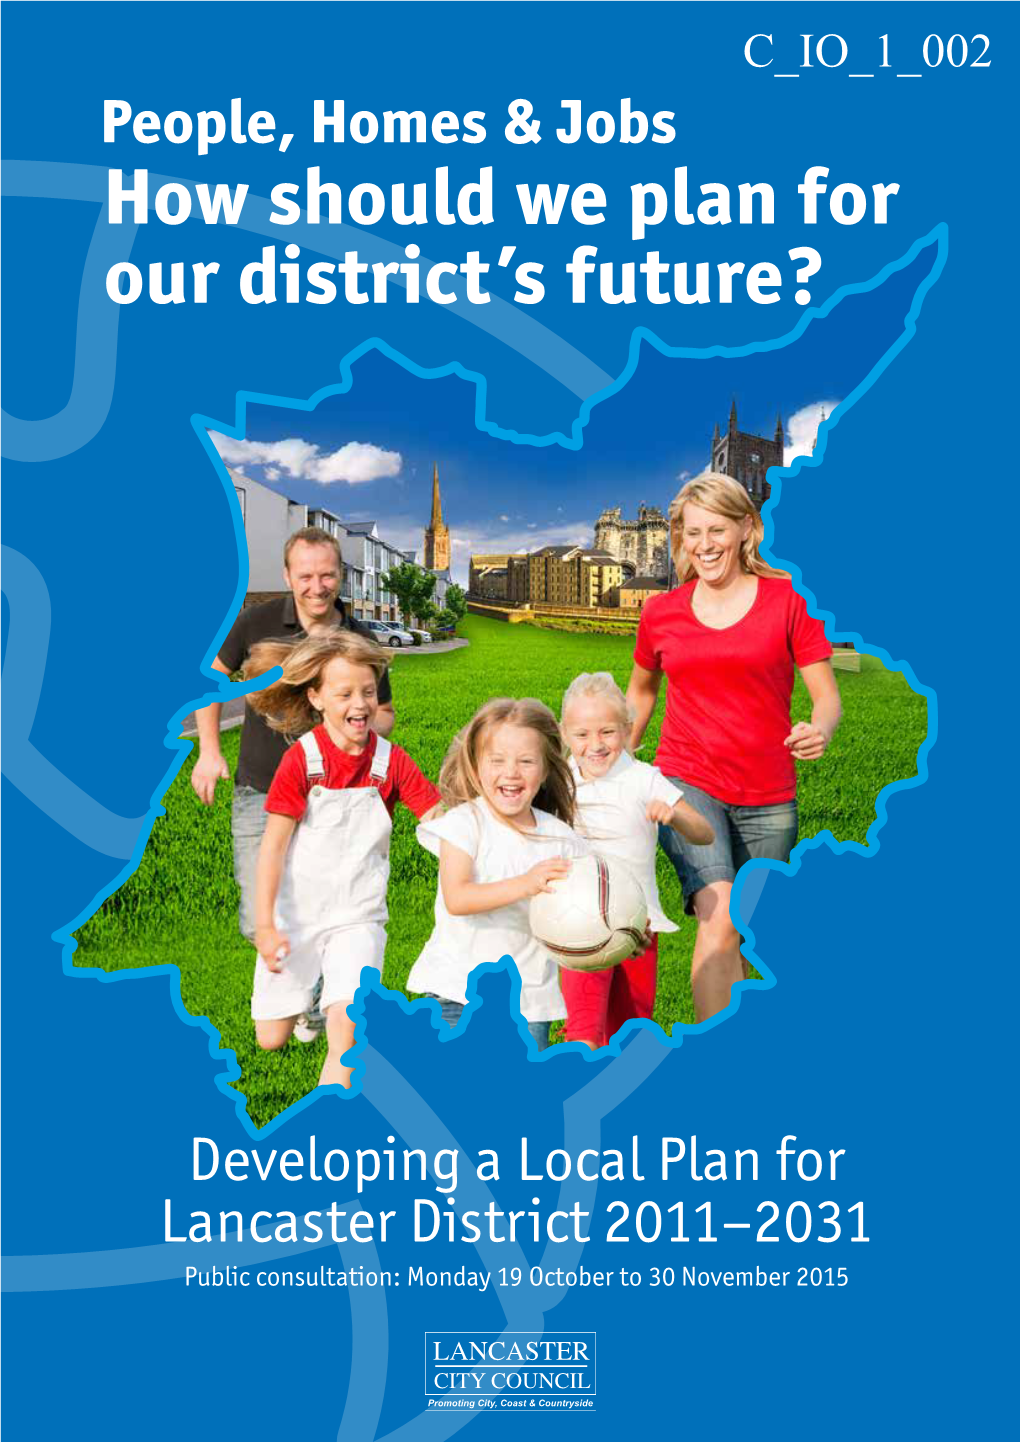 How Should We Plan for Our District's Future?